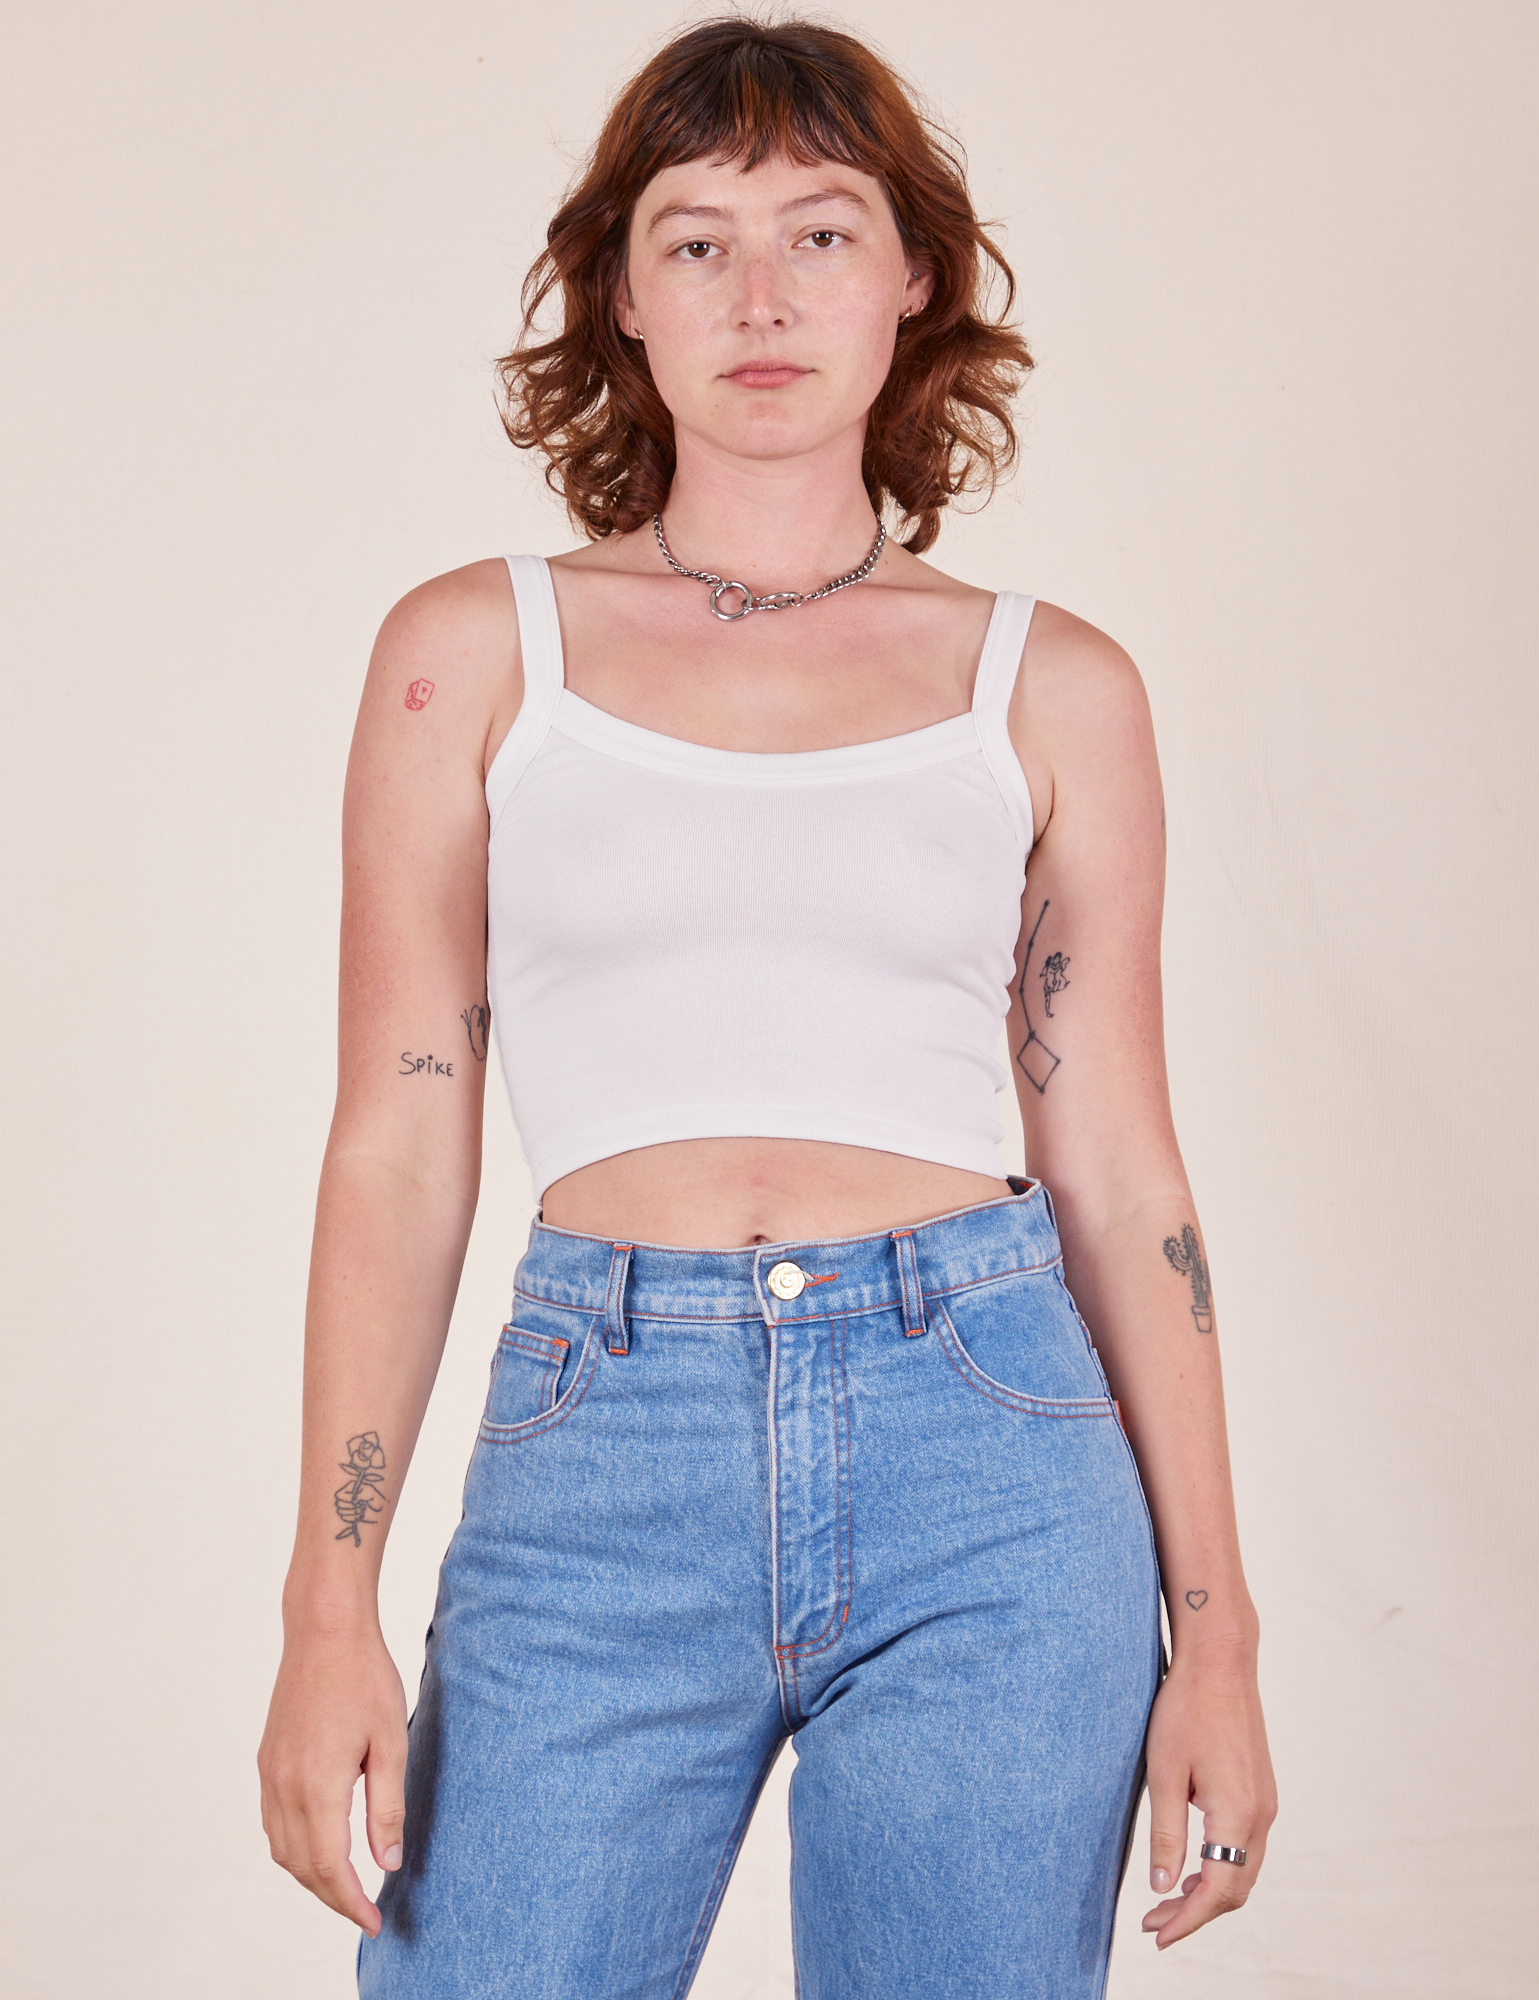 Alex is 5&#39;8&quot; and wearing P Cropped Cami in Vintage Tee Off-White worn with light wash Frontier Jeans